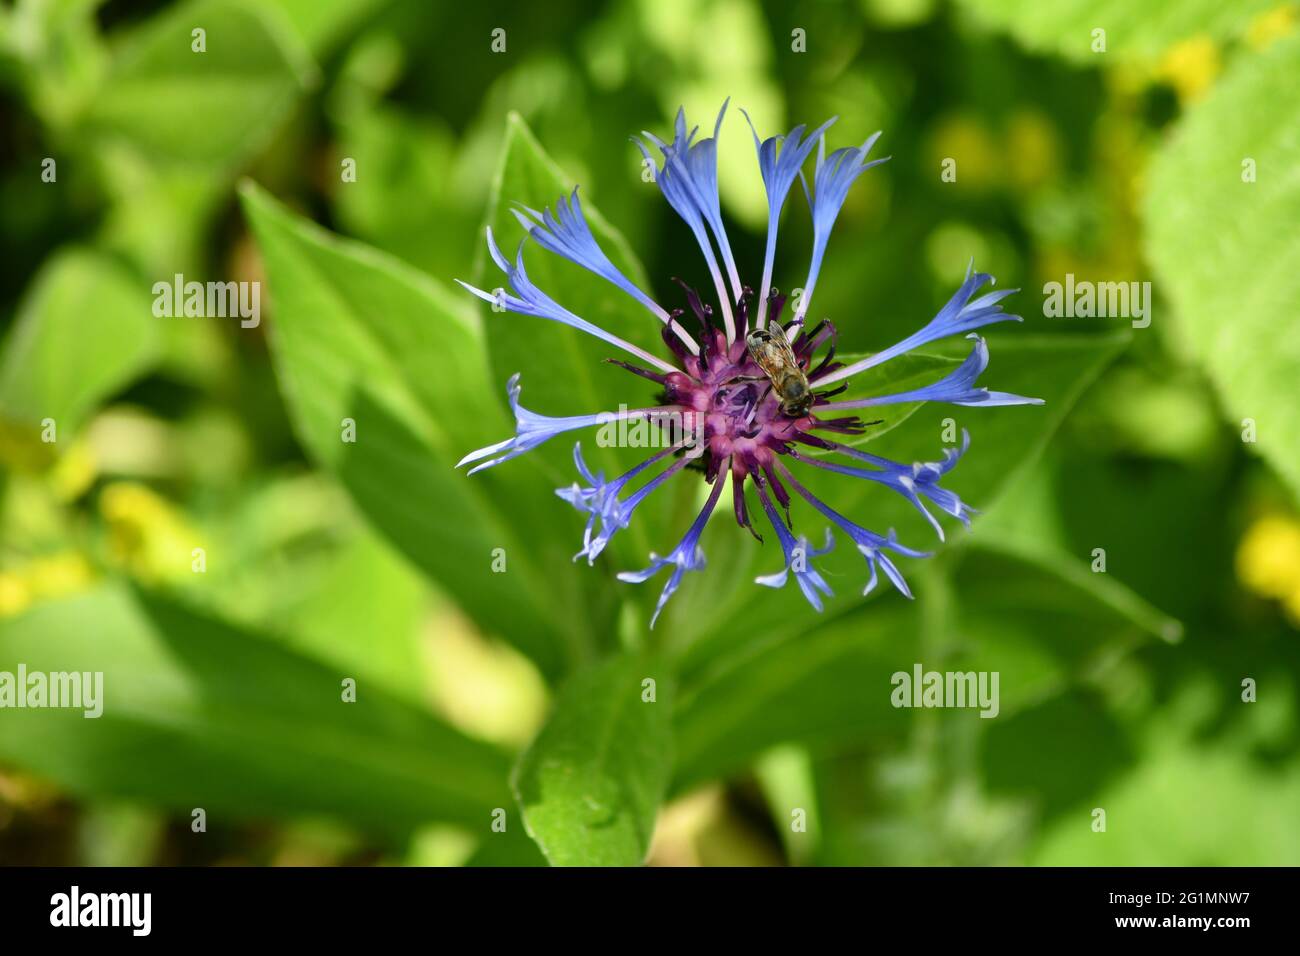 An English working bee collecting pollen from the center of a Centaurea Montana plant Stock Photo